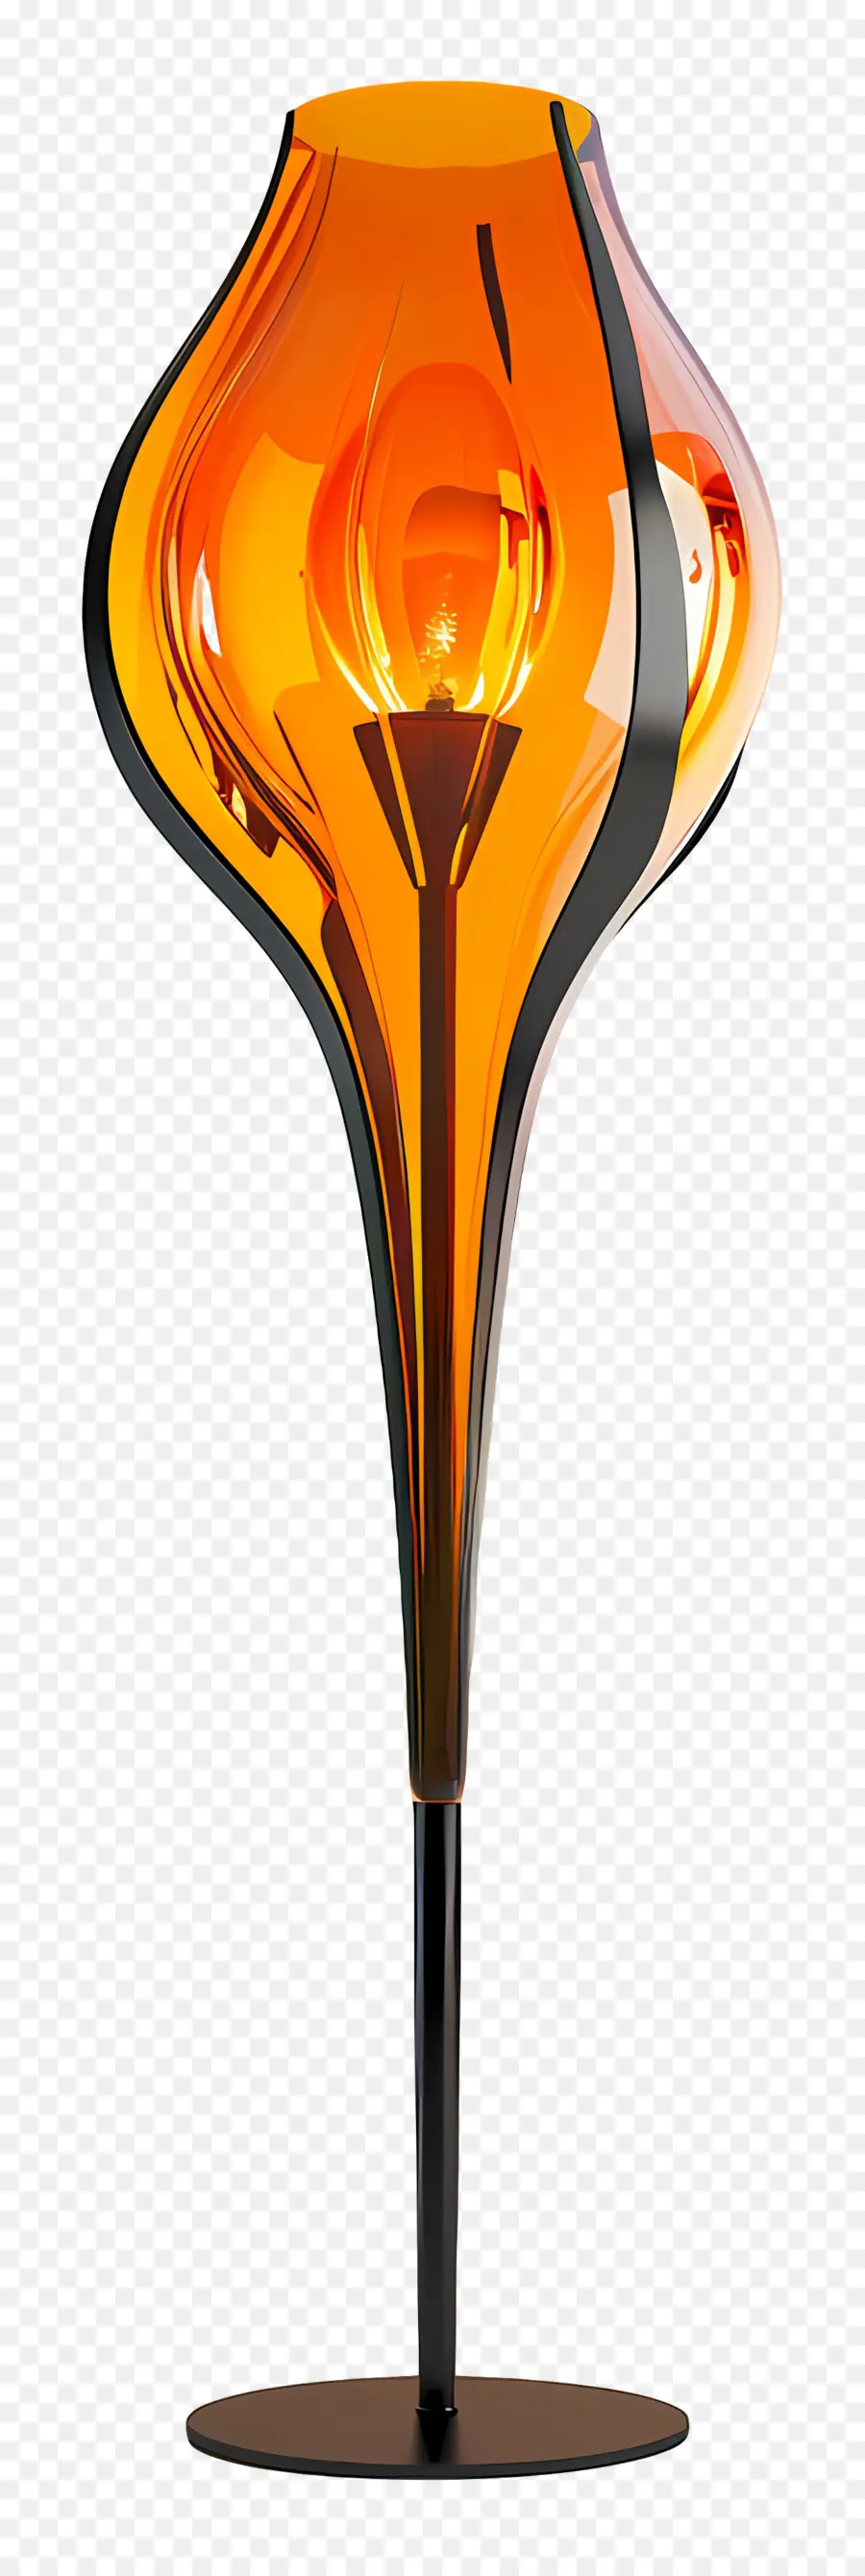 Lampadaire，Lampe Abstraite PNG